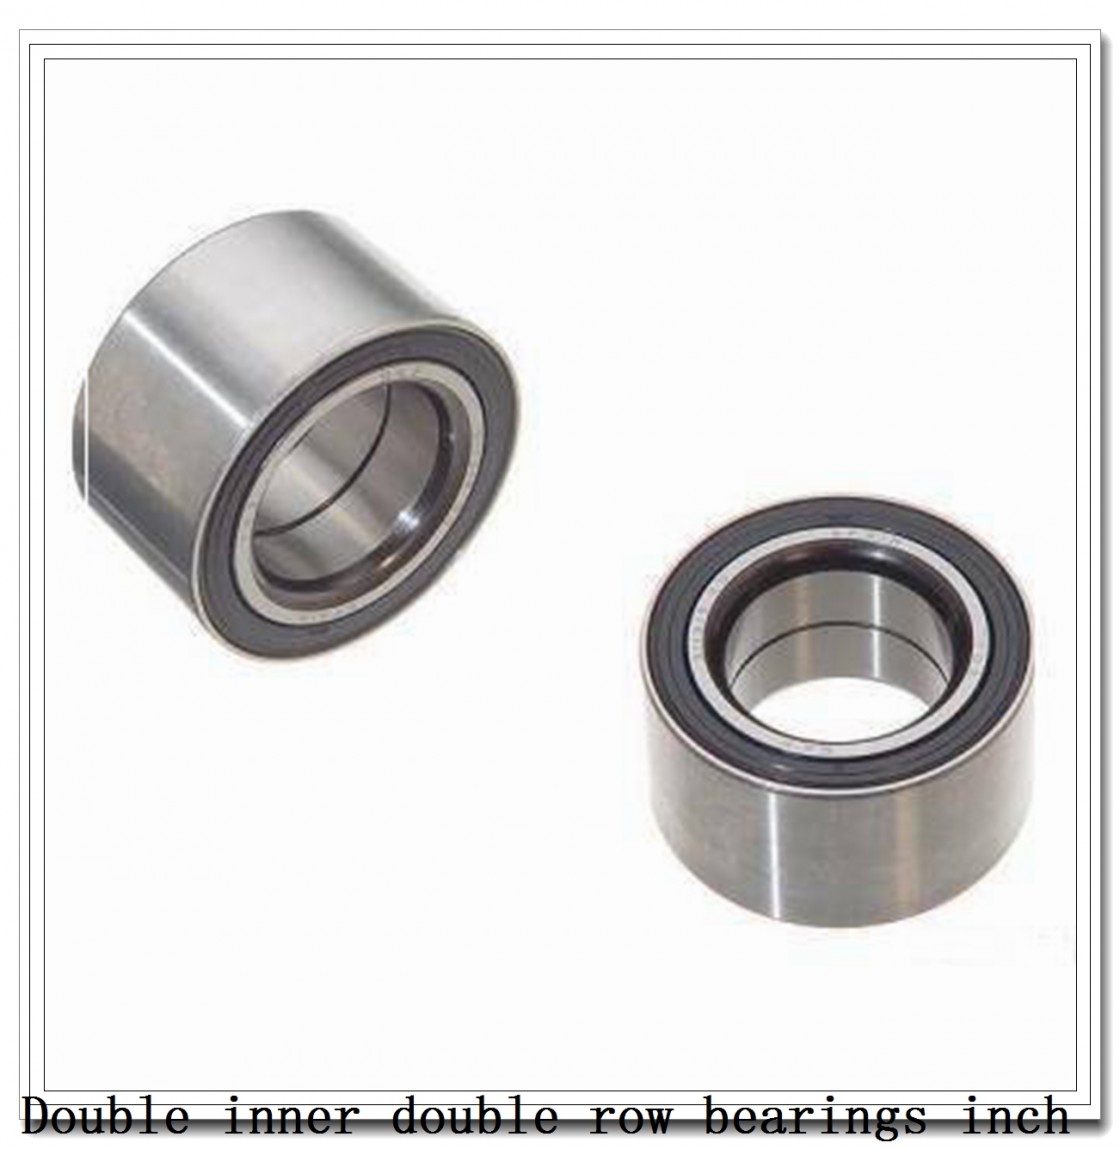 94649/94118D Double inner double row bearings inch